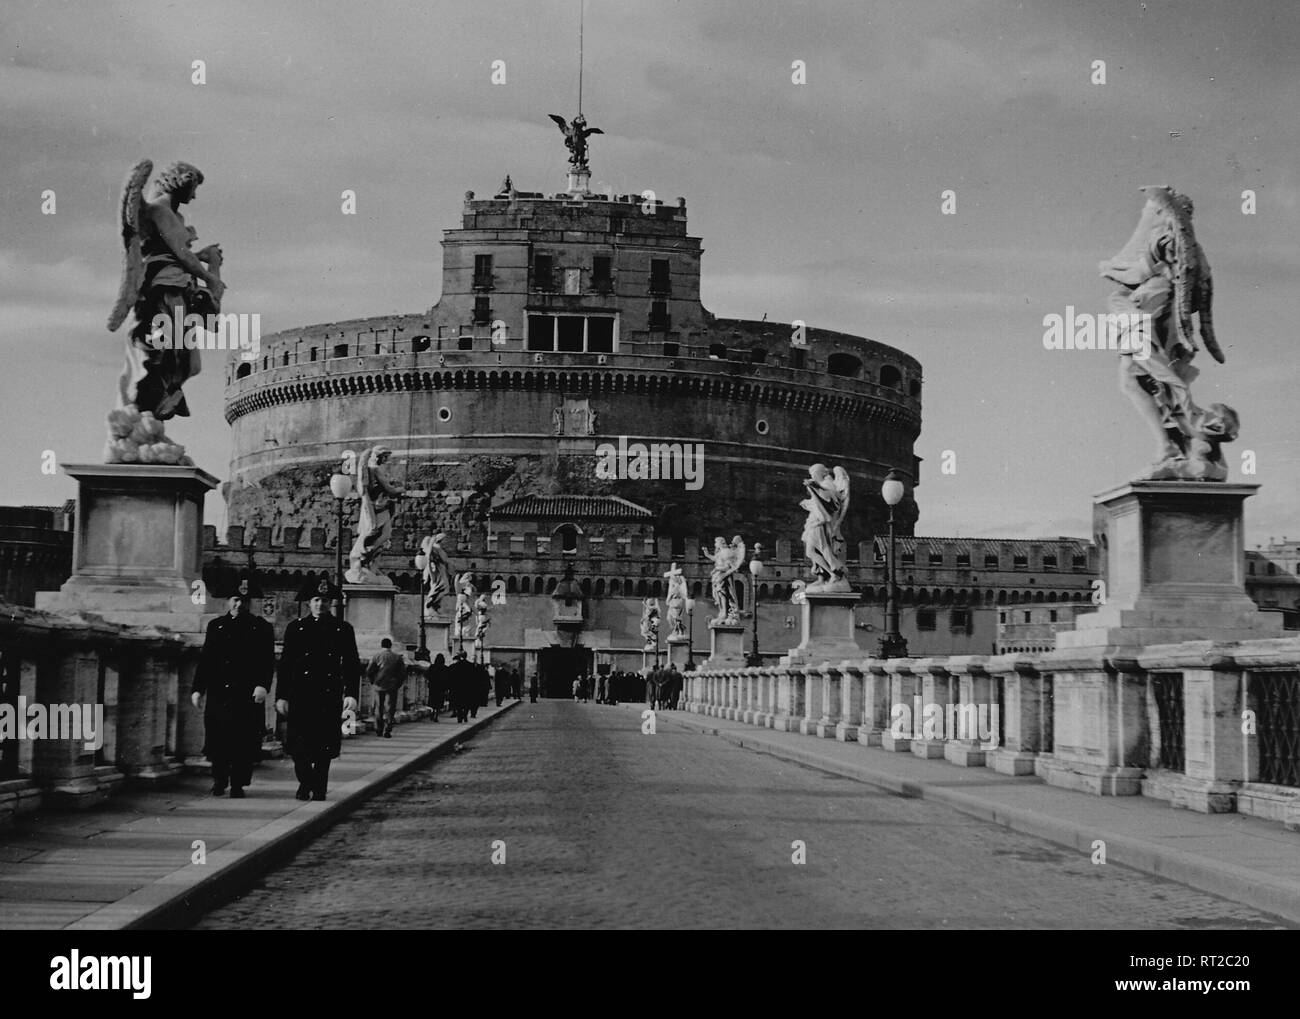 Travel to Rome - Italy in 1950s - Gendarmerie Corps of Vatican City State crossing the St Angel Bridge. In the background the Castel Saint' Angelo in Rome. Engelsburg und Engelsbrücke in Rom, Italien. Image date 1954. Photo by Erich Andres Stock Photo